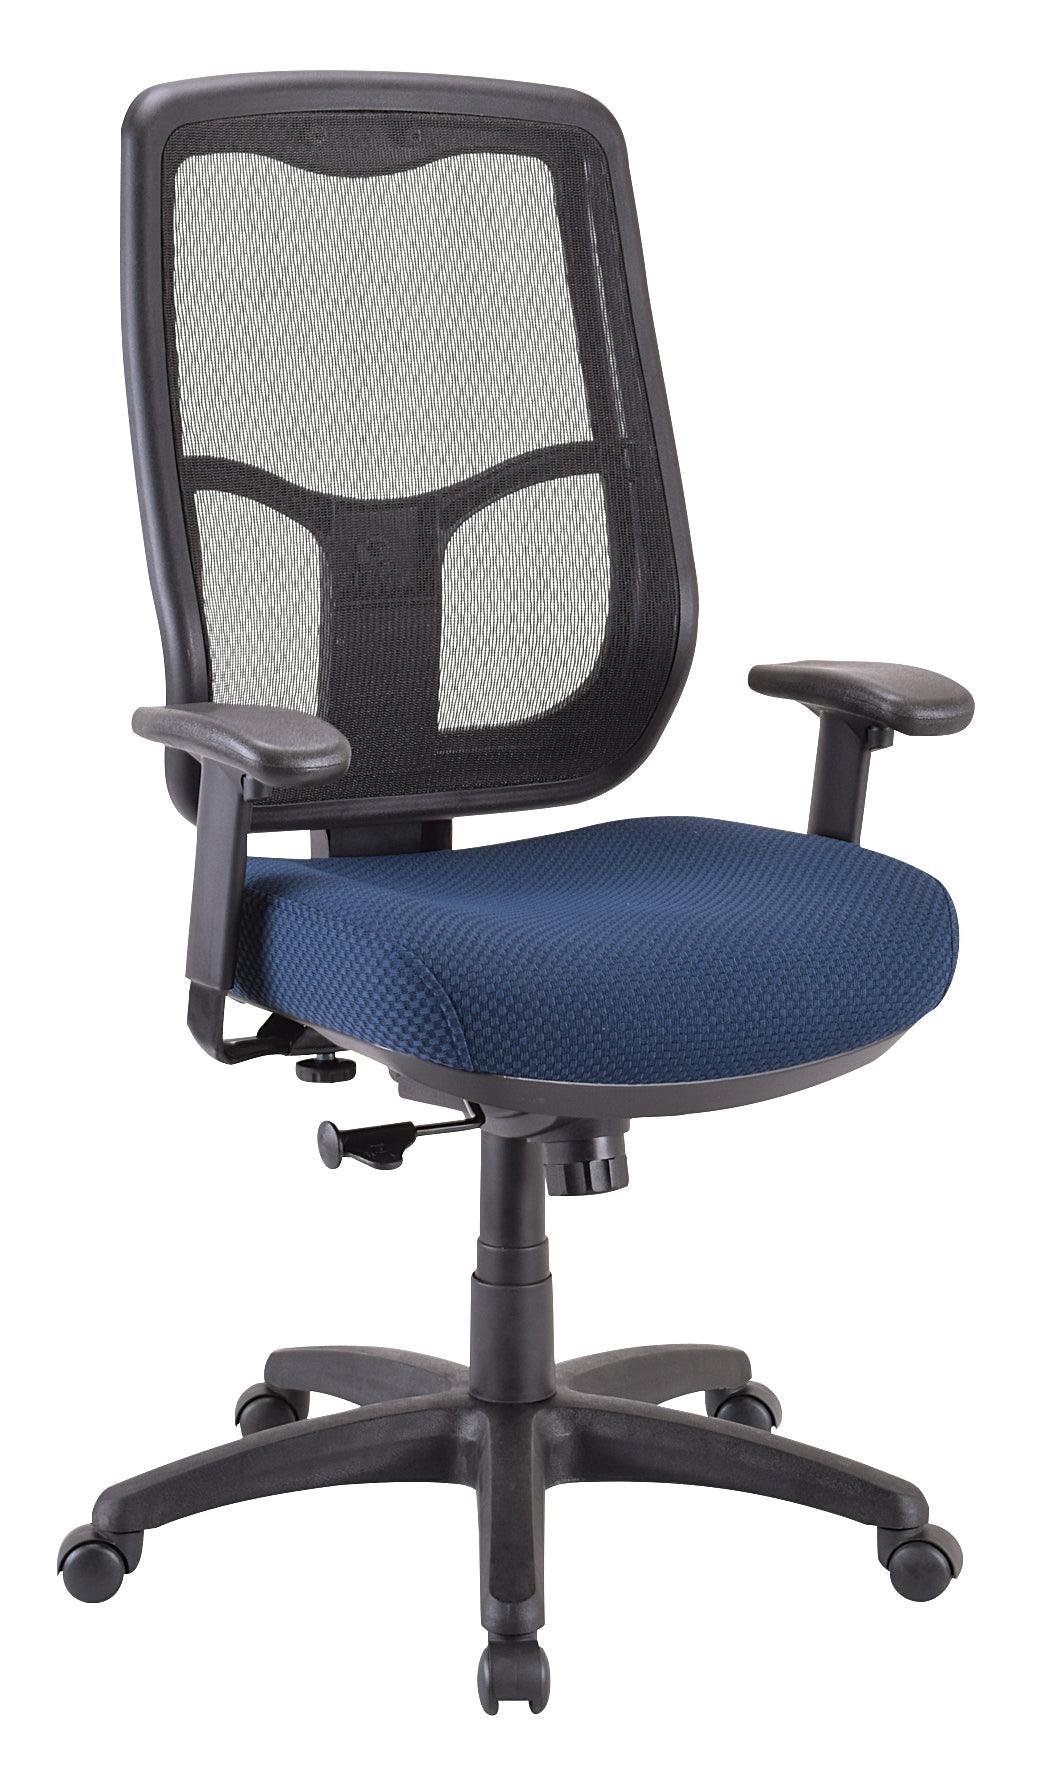 TEMPUR®-944 Office Chair: Everyday Comfort, Elevated - Layton Health